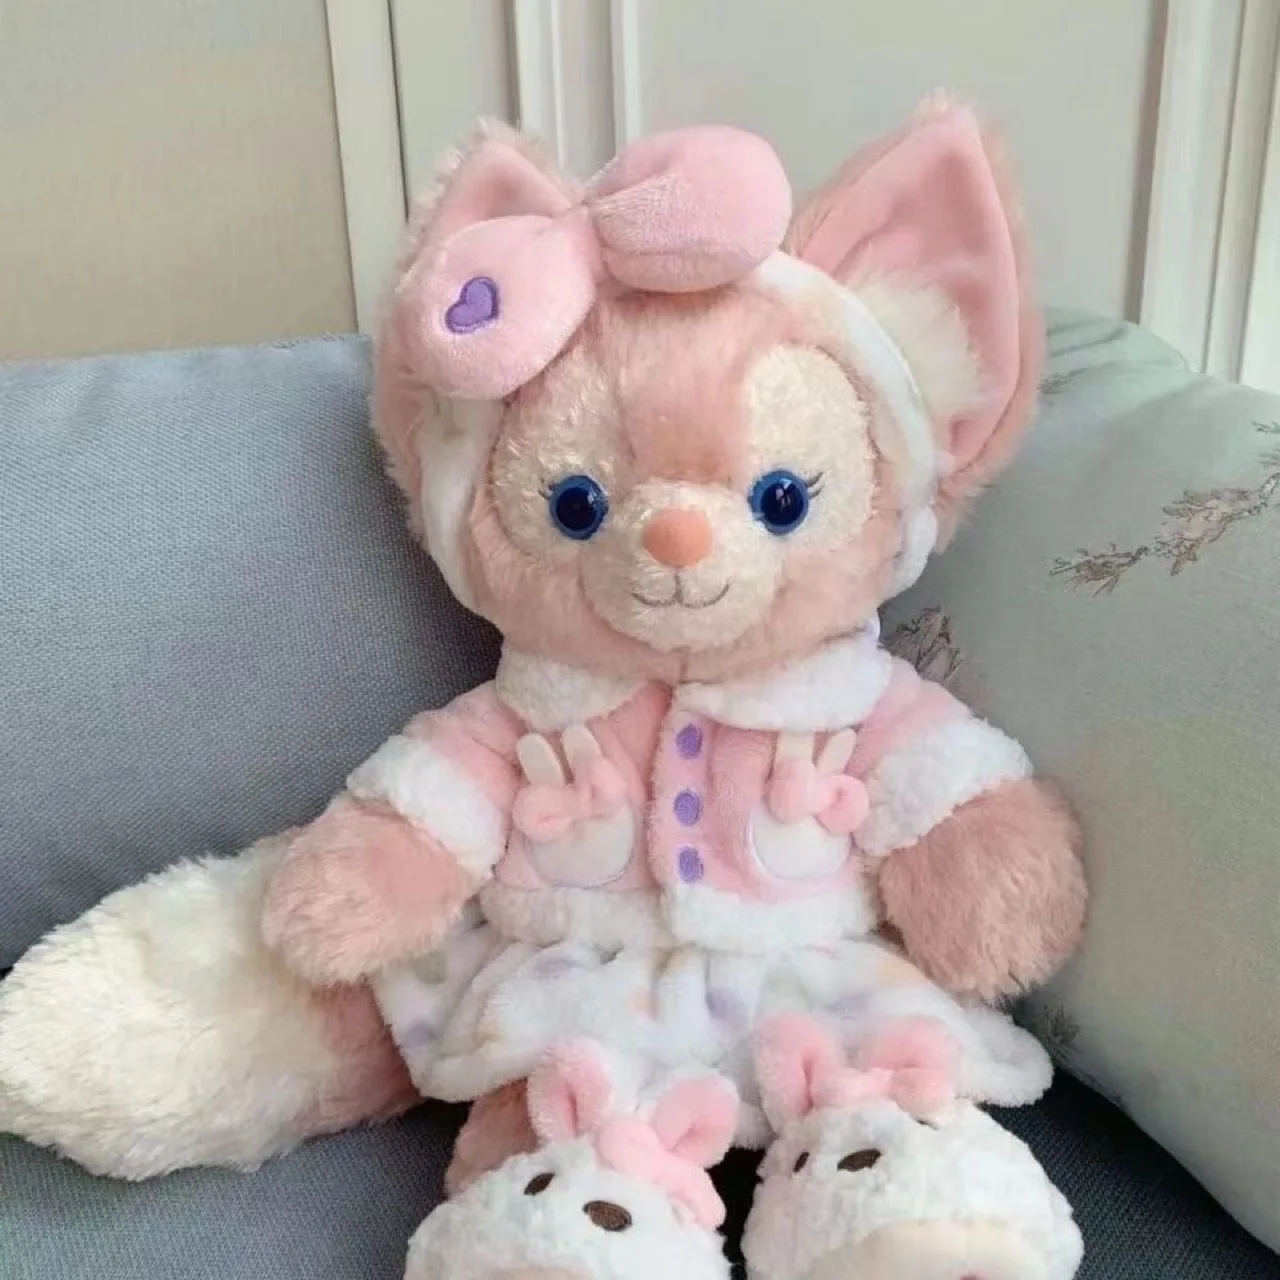 

40cm Disney classic character pajamas LinaBell stuffed plush toy Pink Fox Lingna Belle doll Animal bed sofa Pillow kids gift